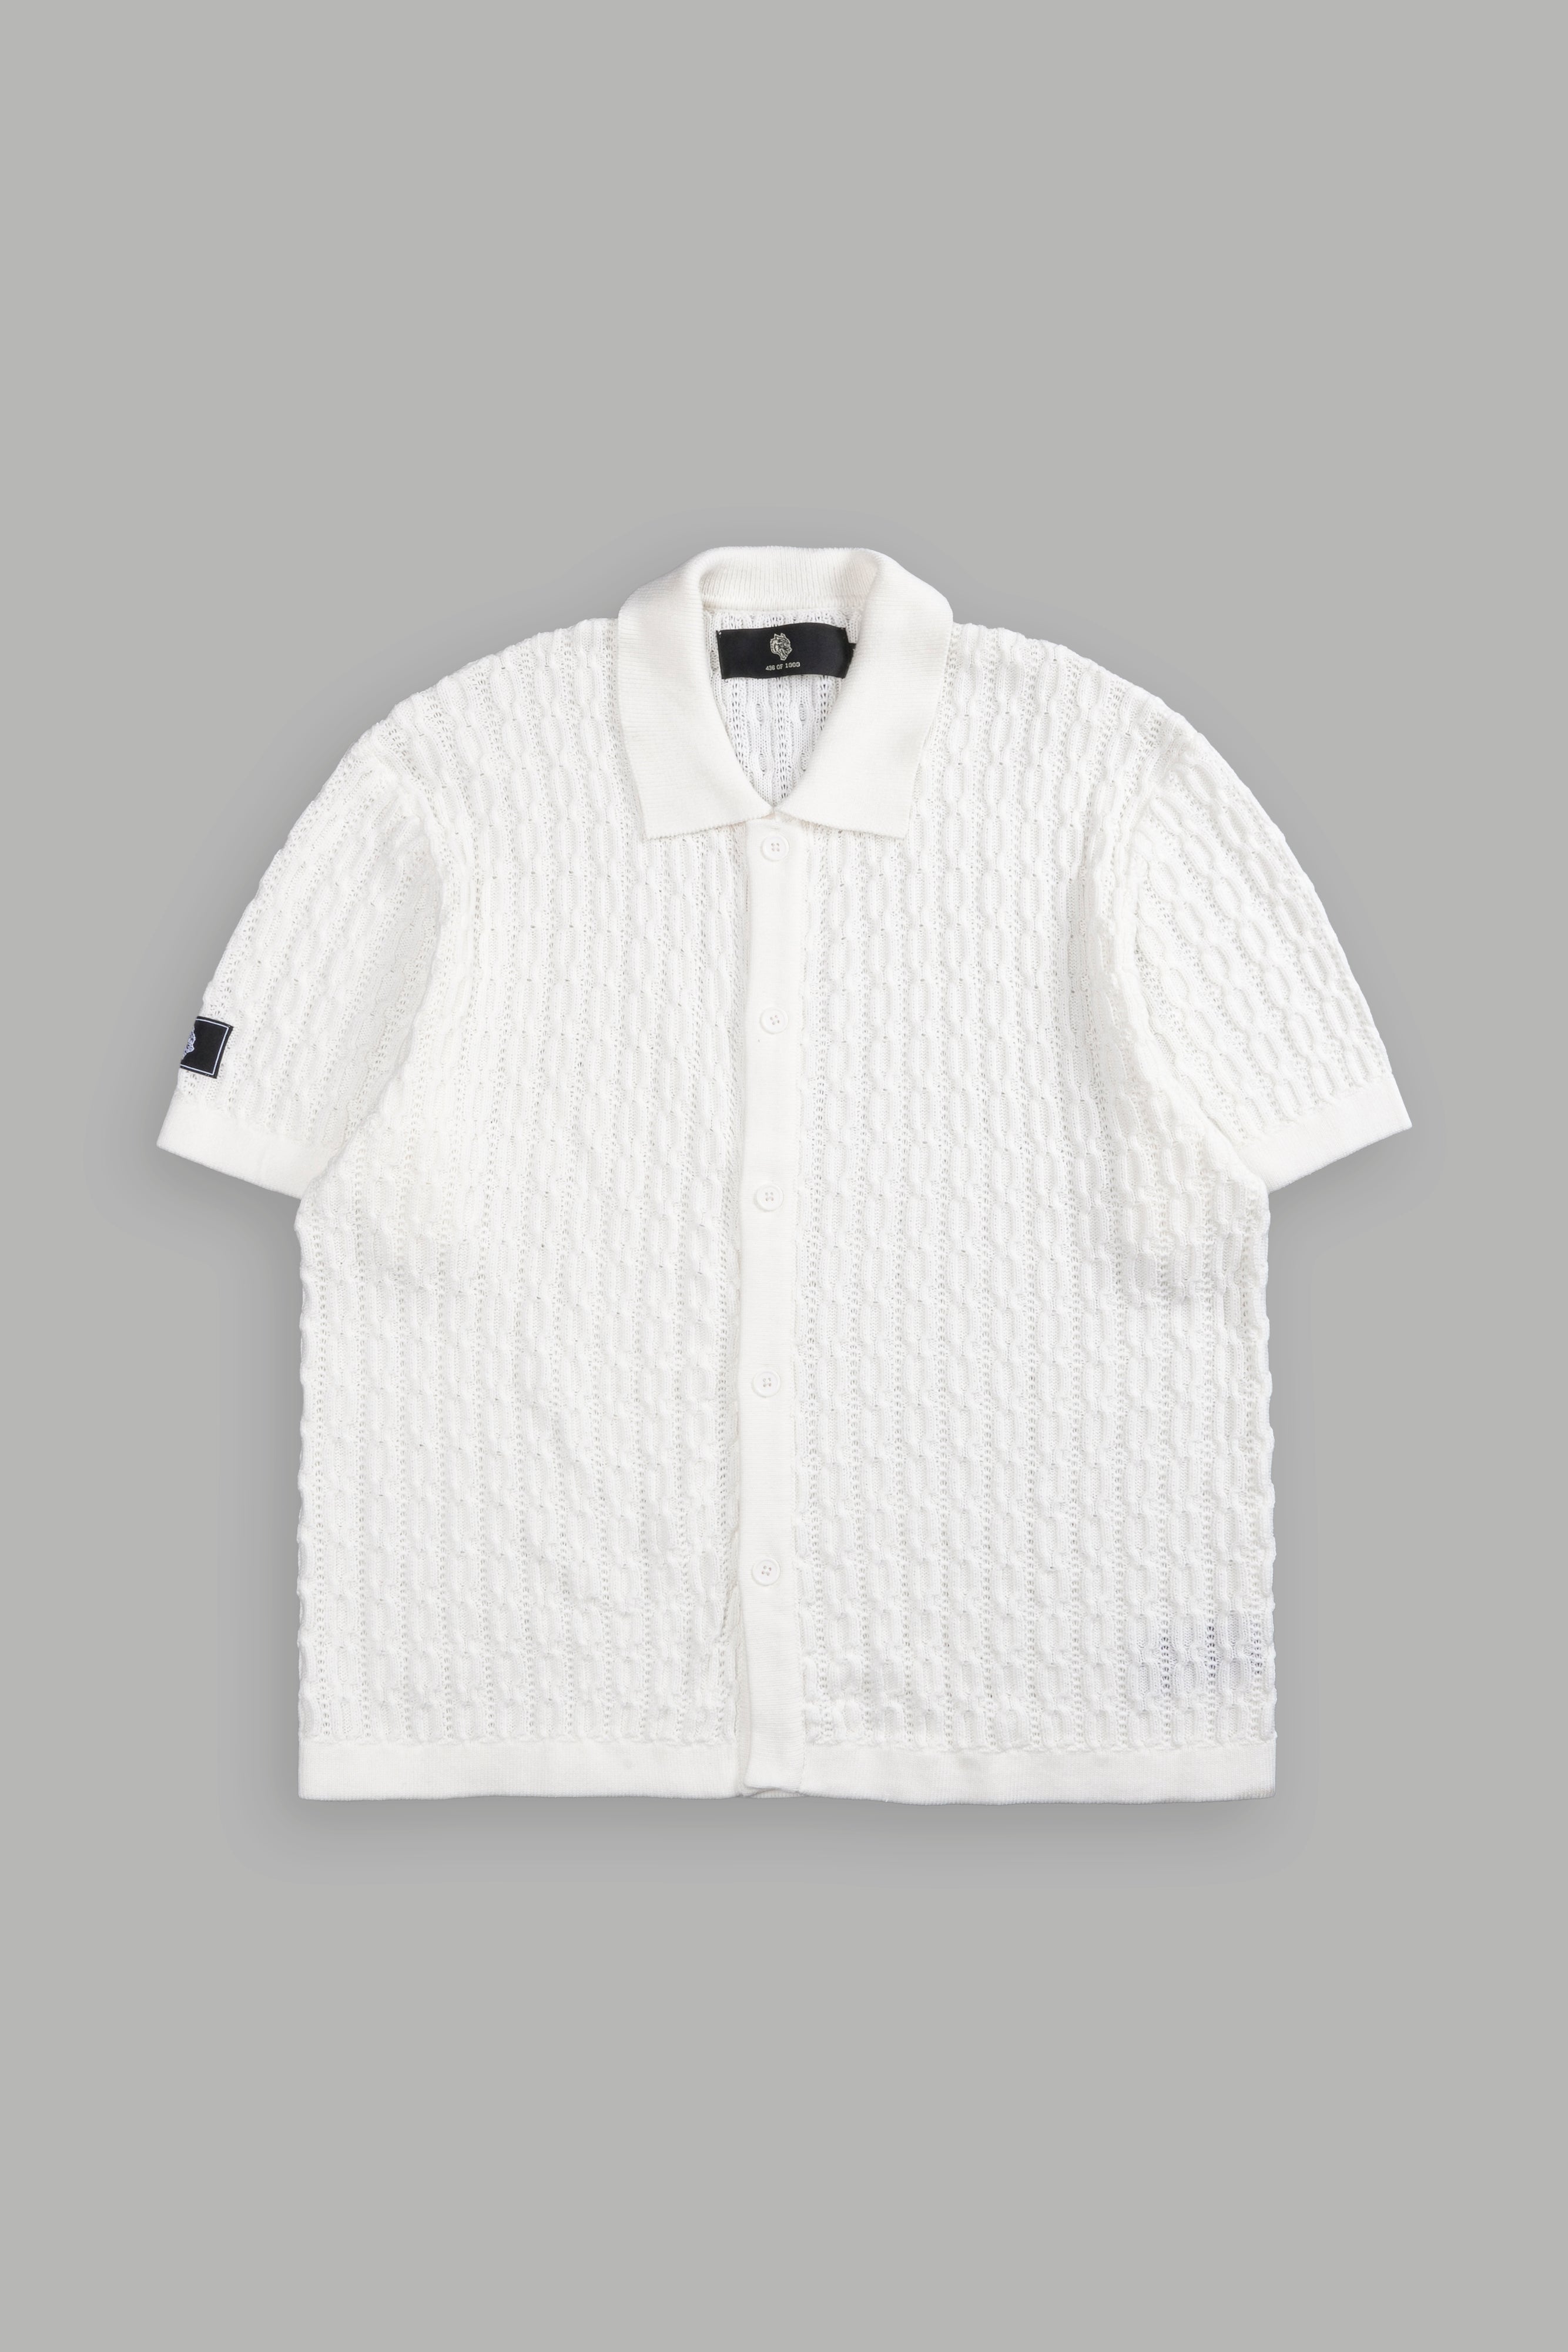 Wolf Patch Wah-El Knit S/S Button Up Shirt in Cream